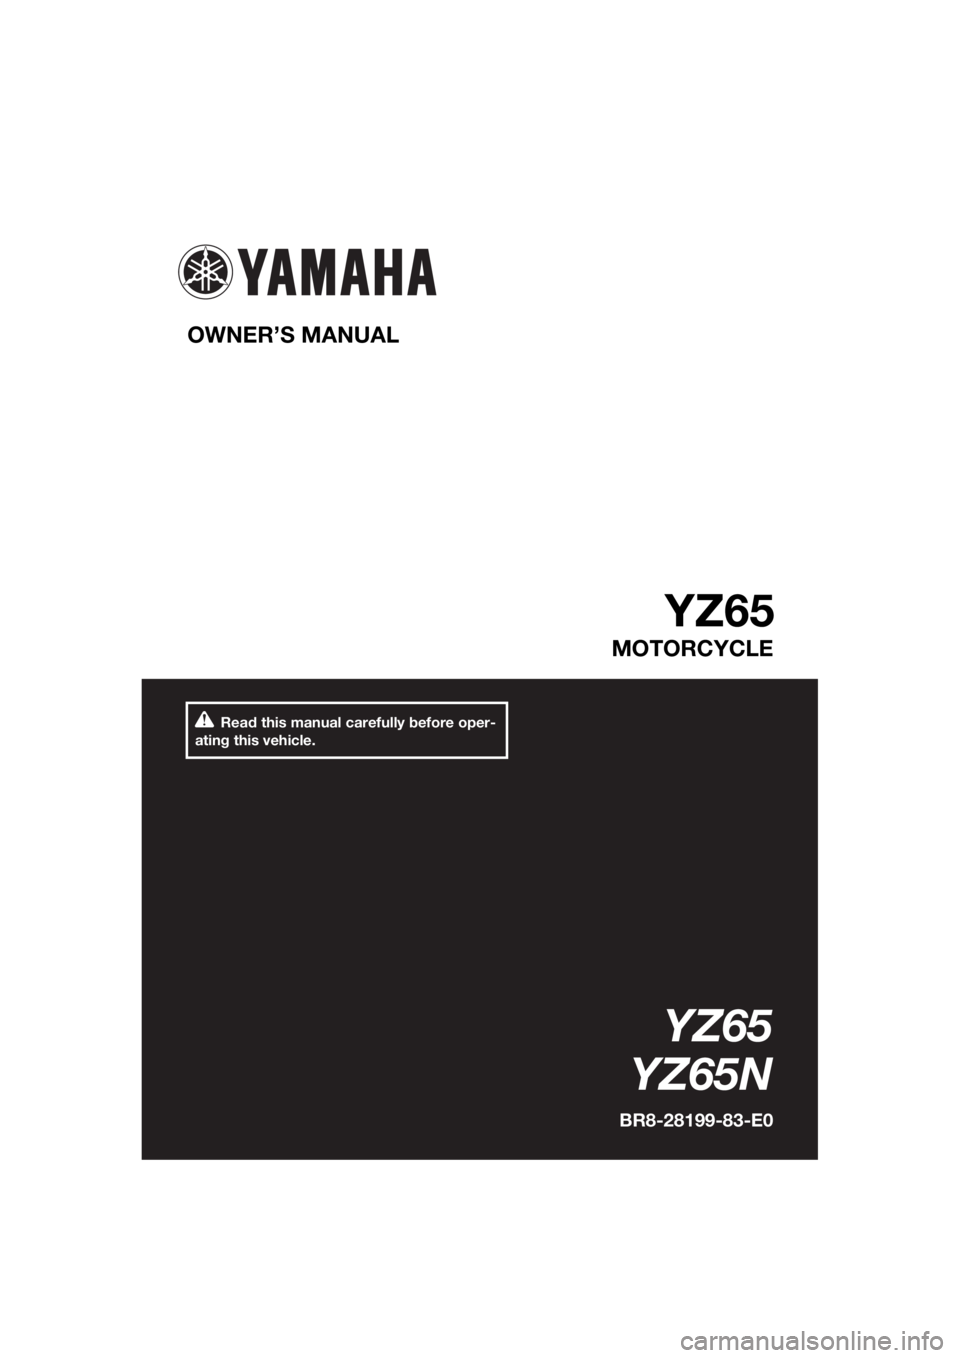 YAMAHA YZ65 2022  Owners Manual Read this manual carefully before oper-
ating this vehicle.
OWNER’S MANUAL 
YZ65
MOTORCYCLE
YZ65
YZ65N
BR8-28199-83-E0
UBR883E0.book  Page 1  Tuesday, February 16, 2021  11:23 AM 